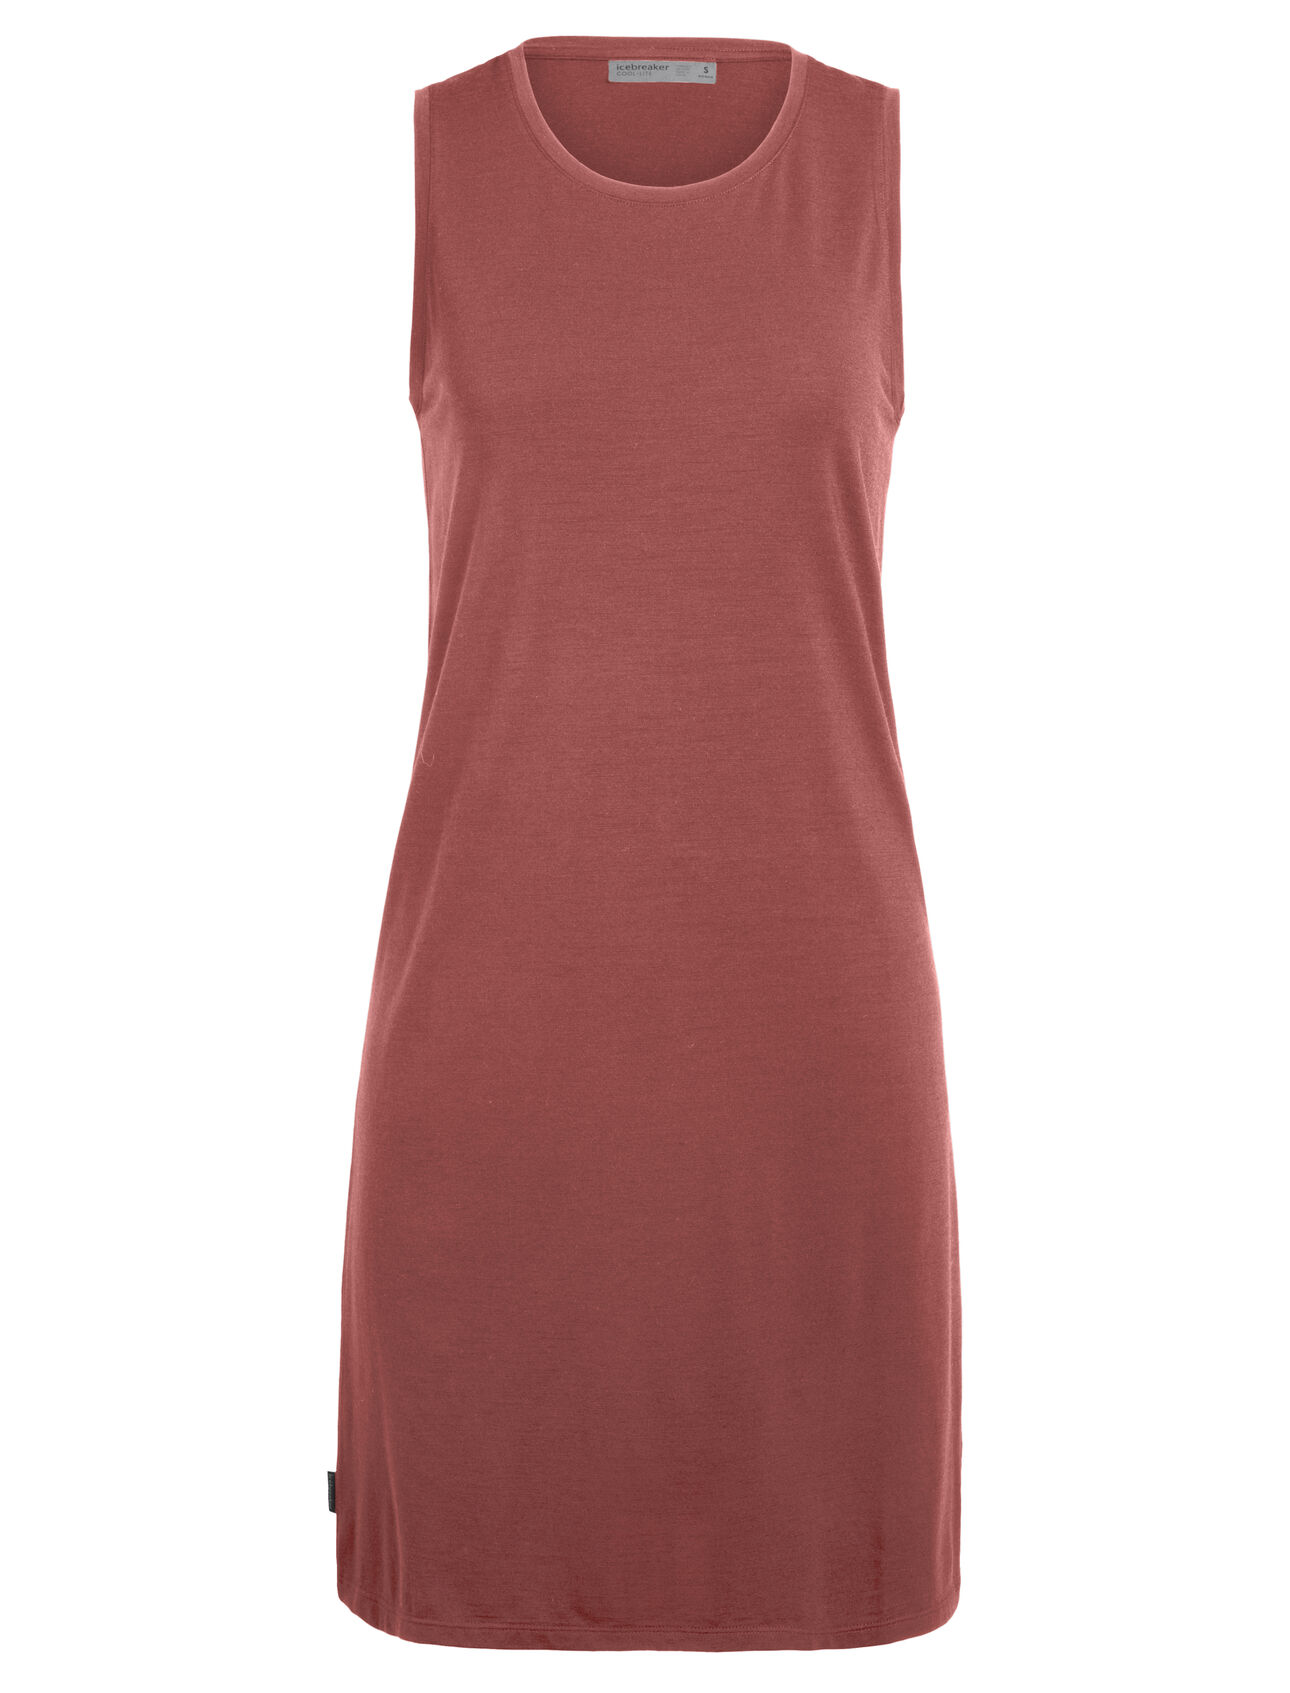 Womens Cool-Lite™ Merino Yanni Sleeveless Dress A light and stretchy women’s dress made from cool-lite™ merino wool jersey fabric for soft comfort and durability, the Yanni Sleeveless Dress features a relaxed fit and a scoop neck design.